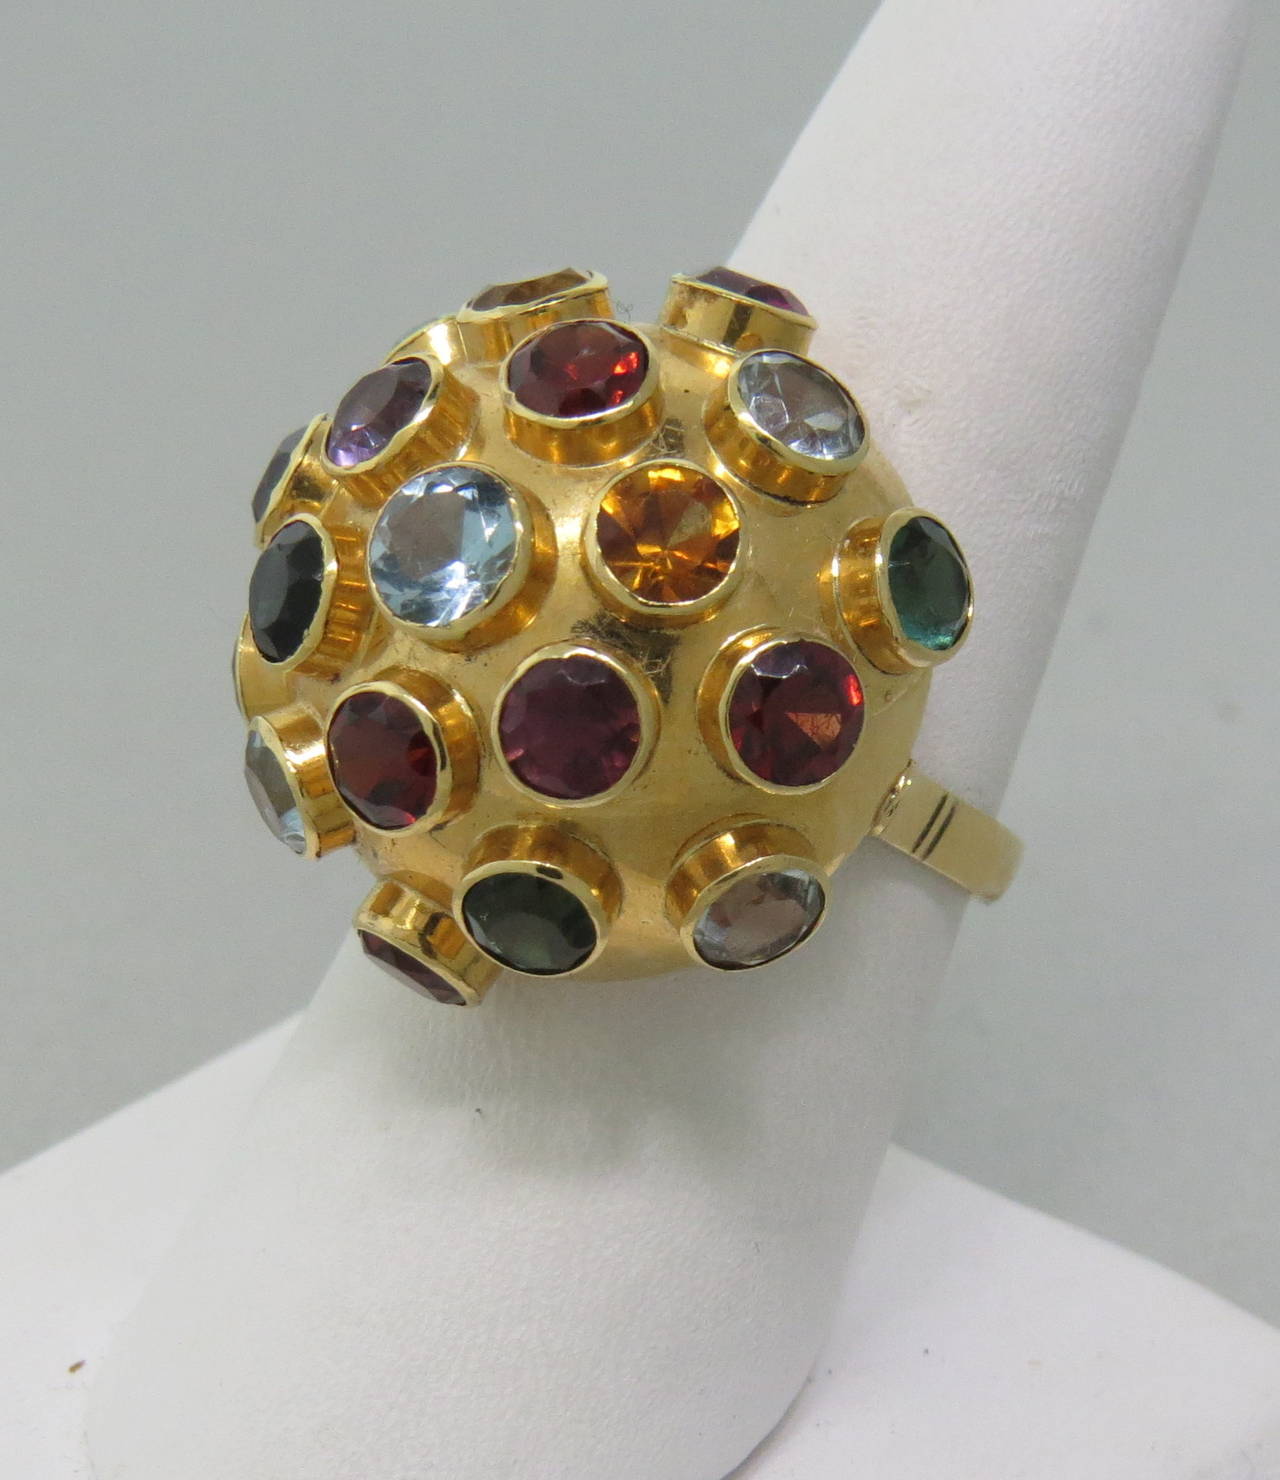 Ring size is 8 1/2, ring top is 24mm in diameter. Multi color semi precious gemstones. Marked 750. weight - 7.4g